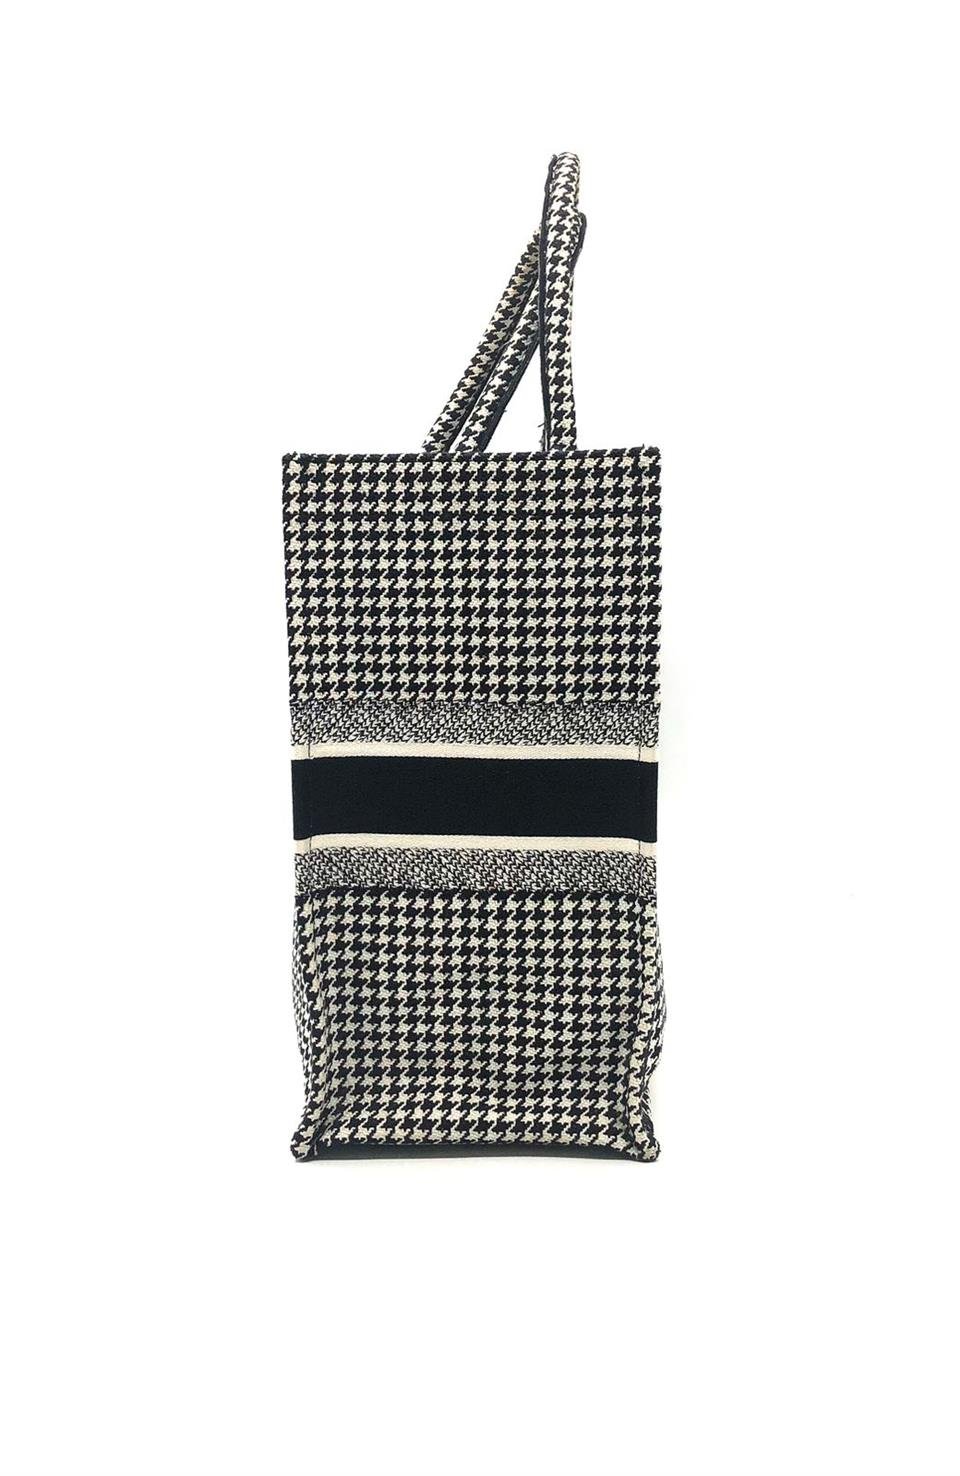 Christian Dior Houndstooth Black White Large Book Tote Bag Deluxe Seconds'ta